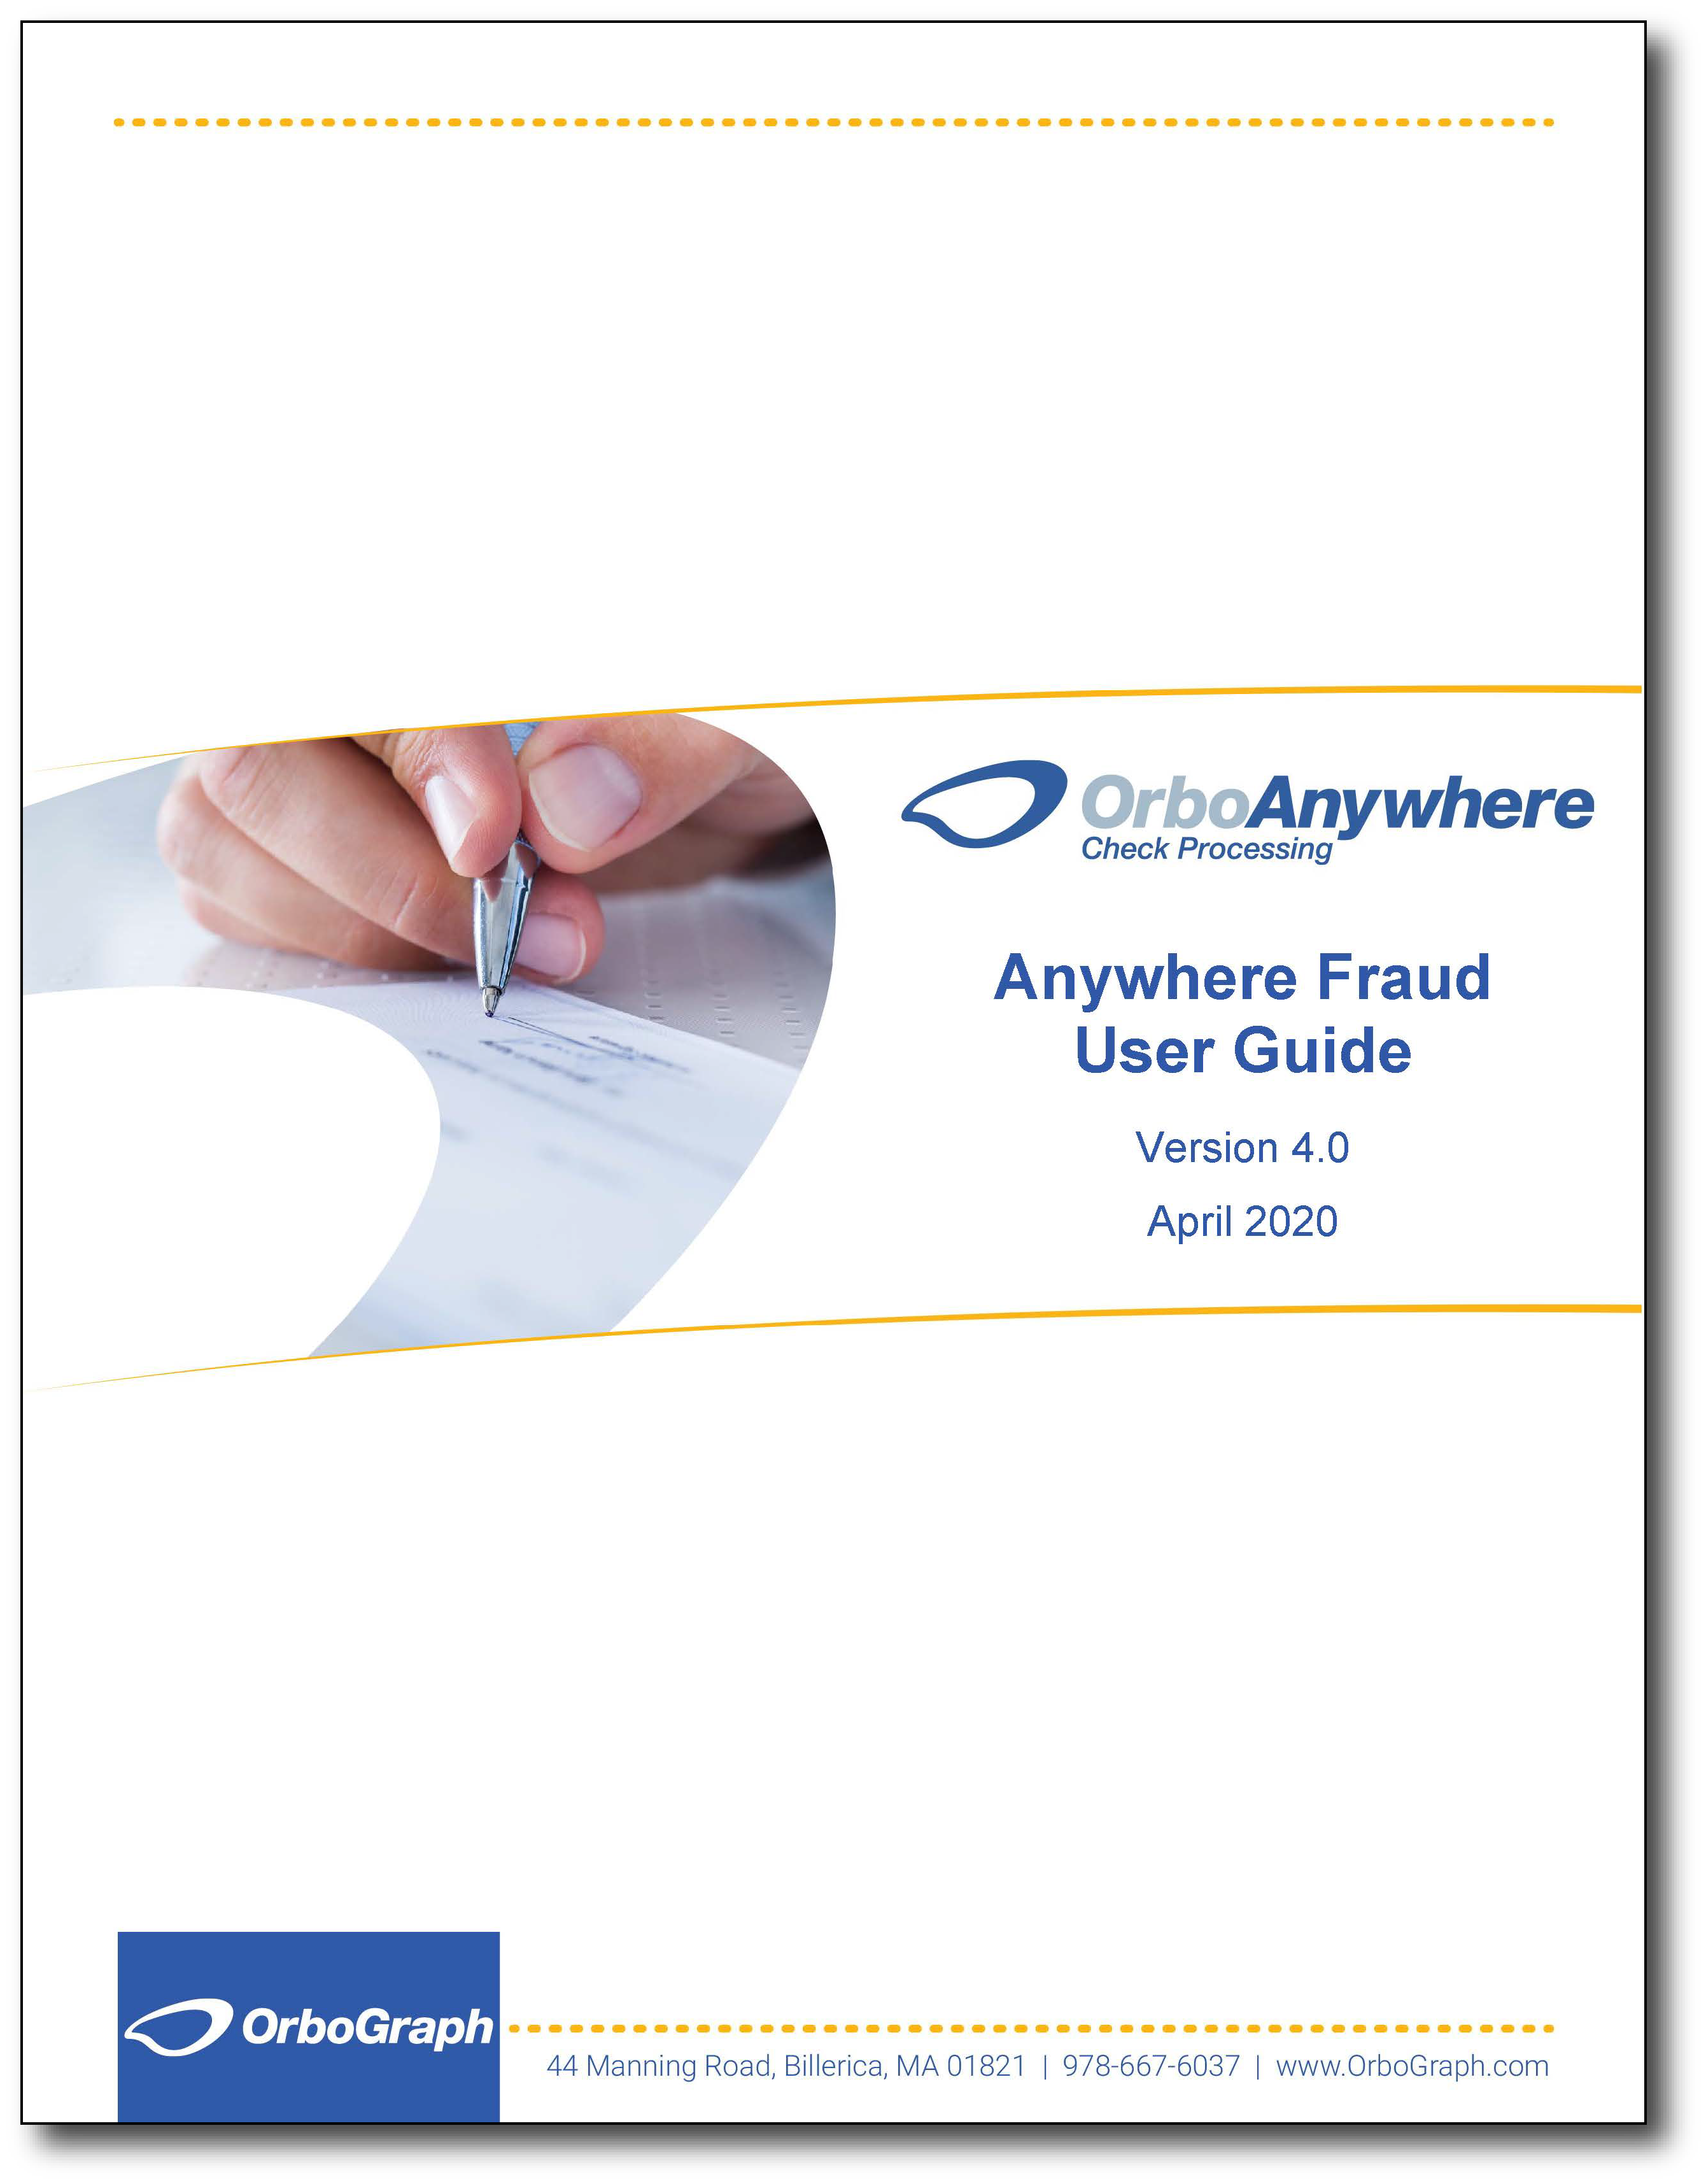 Anywhere_Fraud_User_Guide_v4.0_Final_April_2020_Page_01